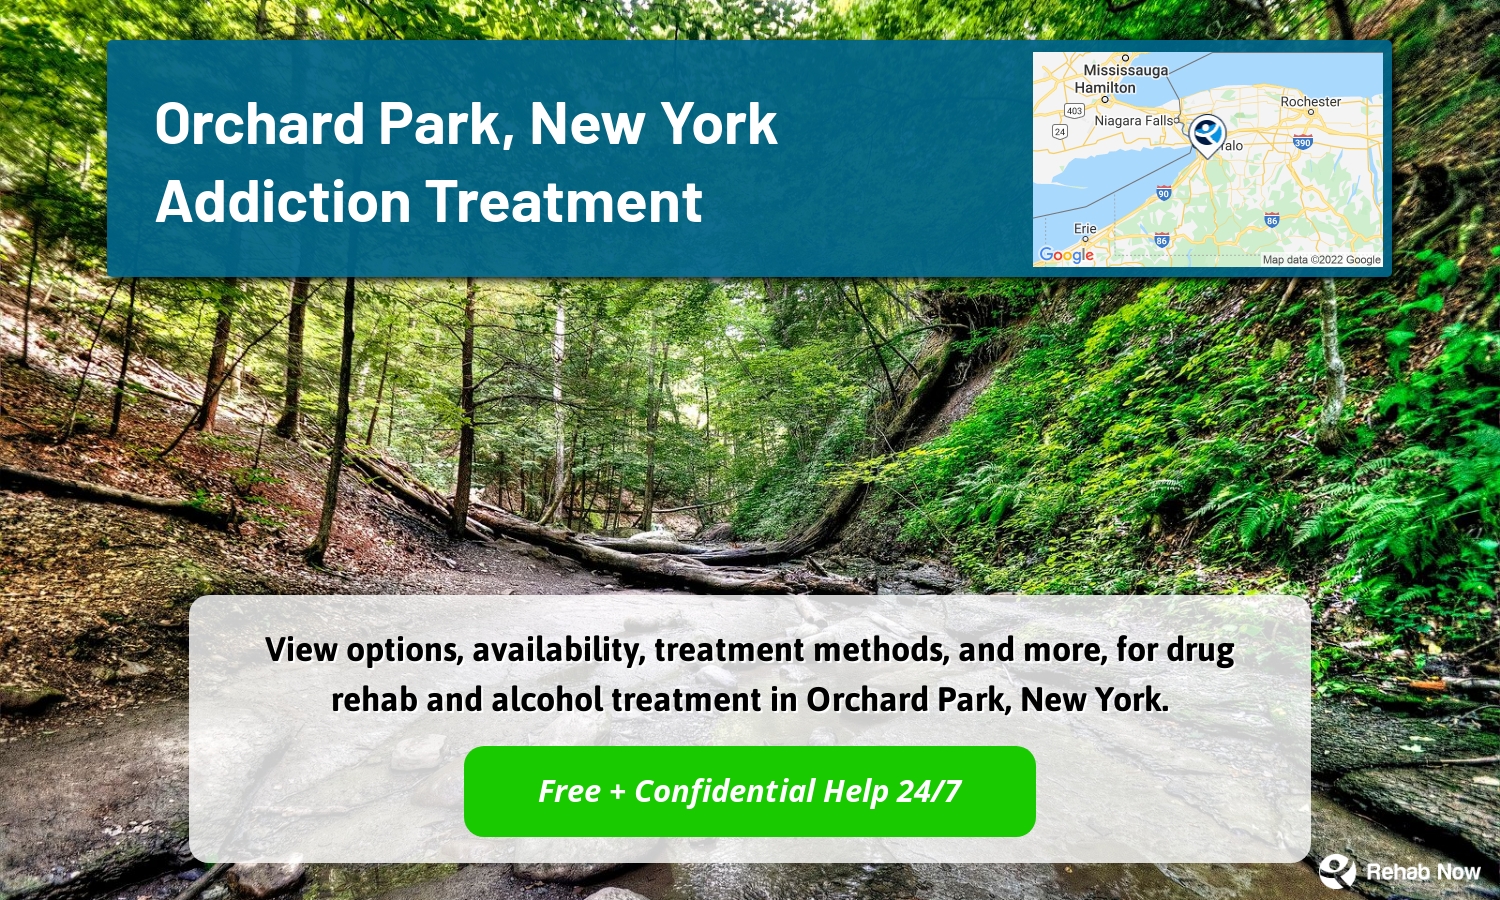 View options, availability, treatment methods, and more, for drug rehab and alcohol treatment in Orchard Park, New York.